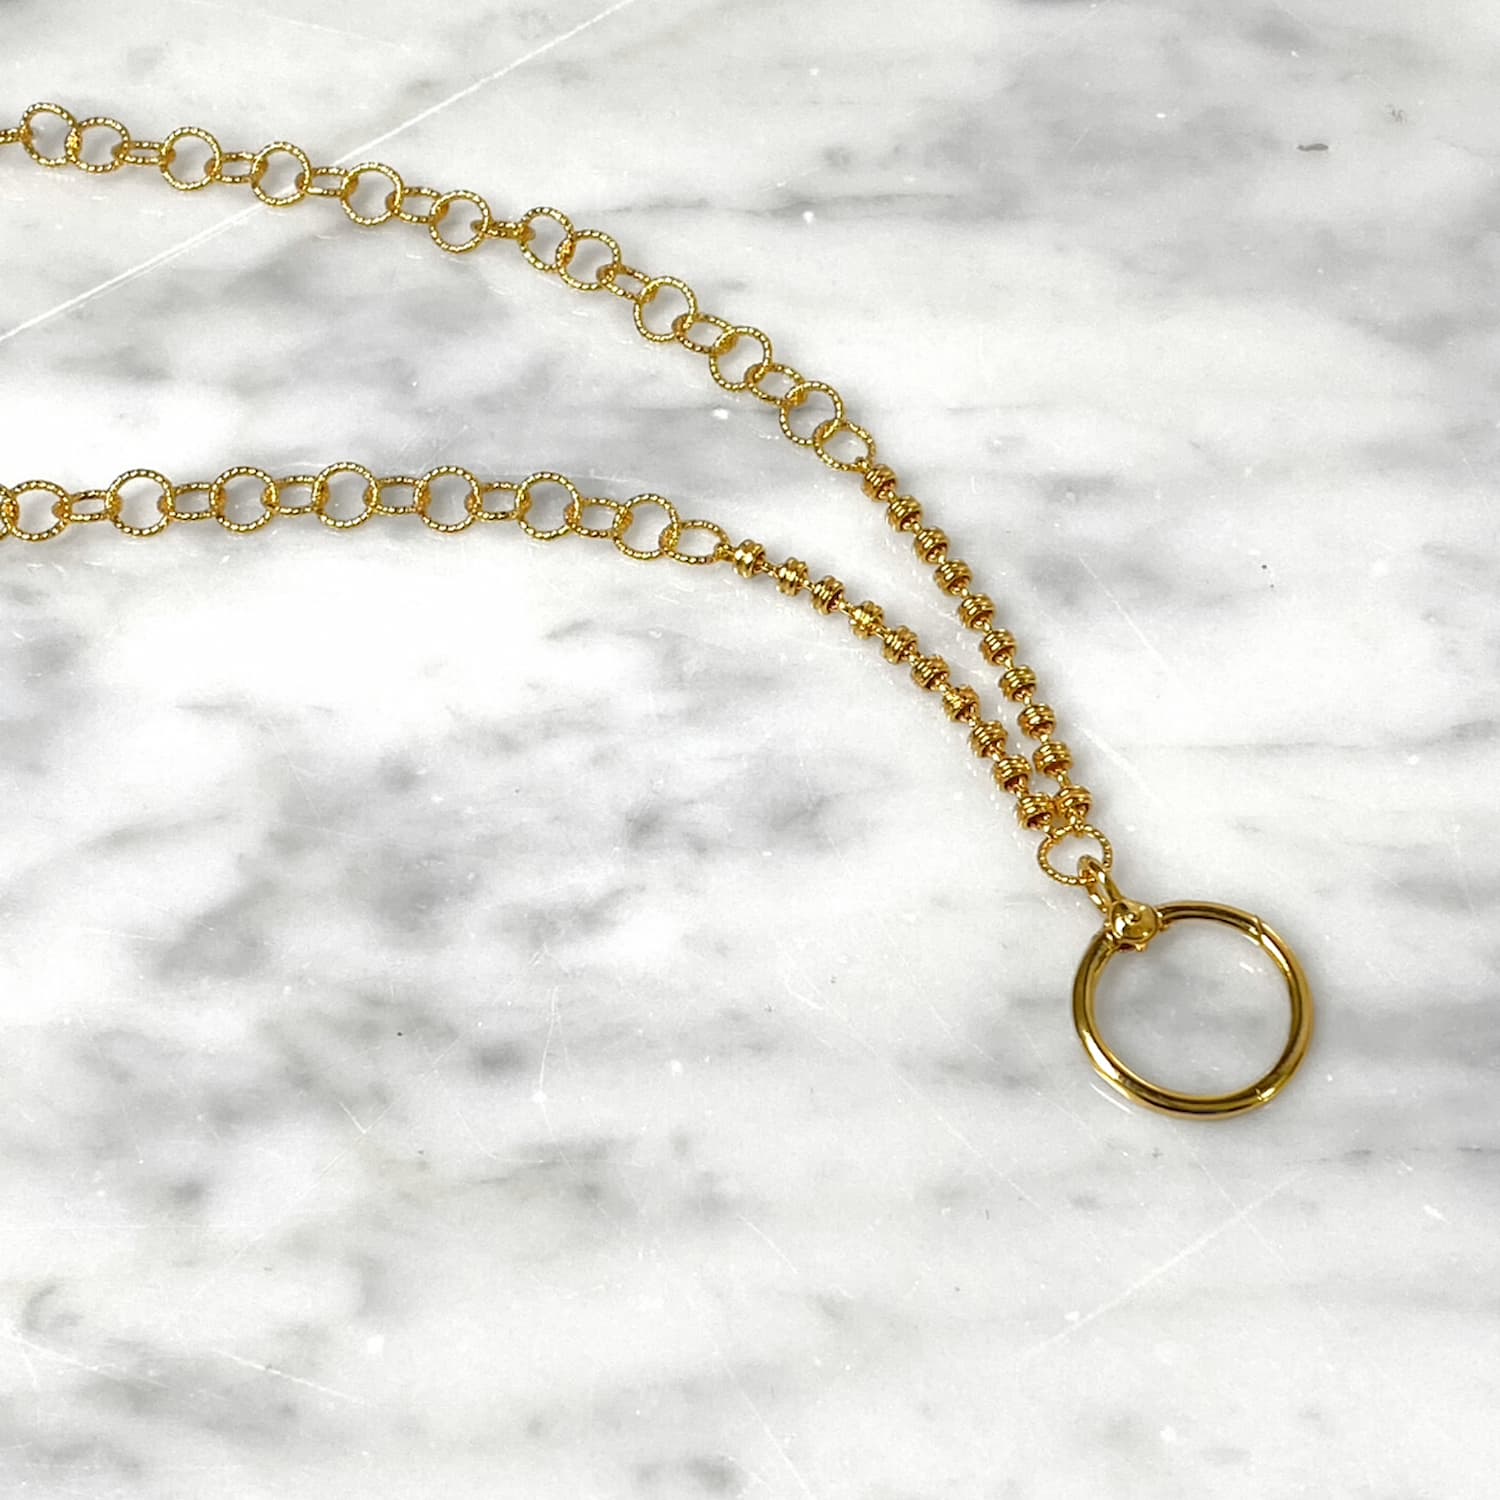 Wispy Full of Charm Necklace in Gold with Links 3mm